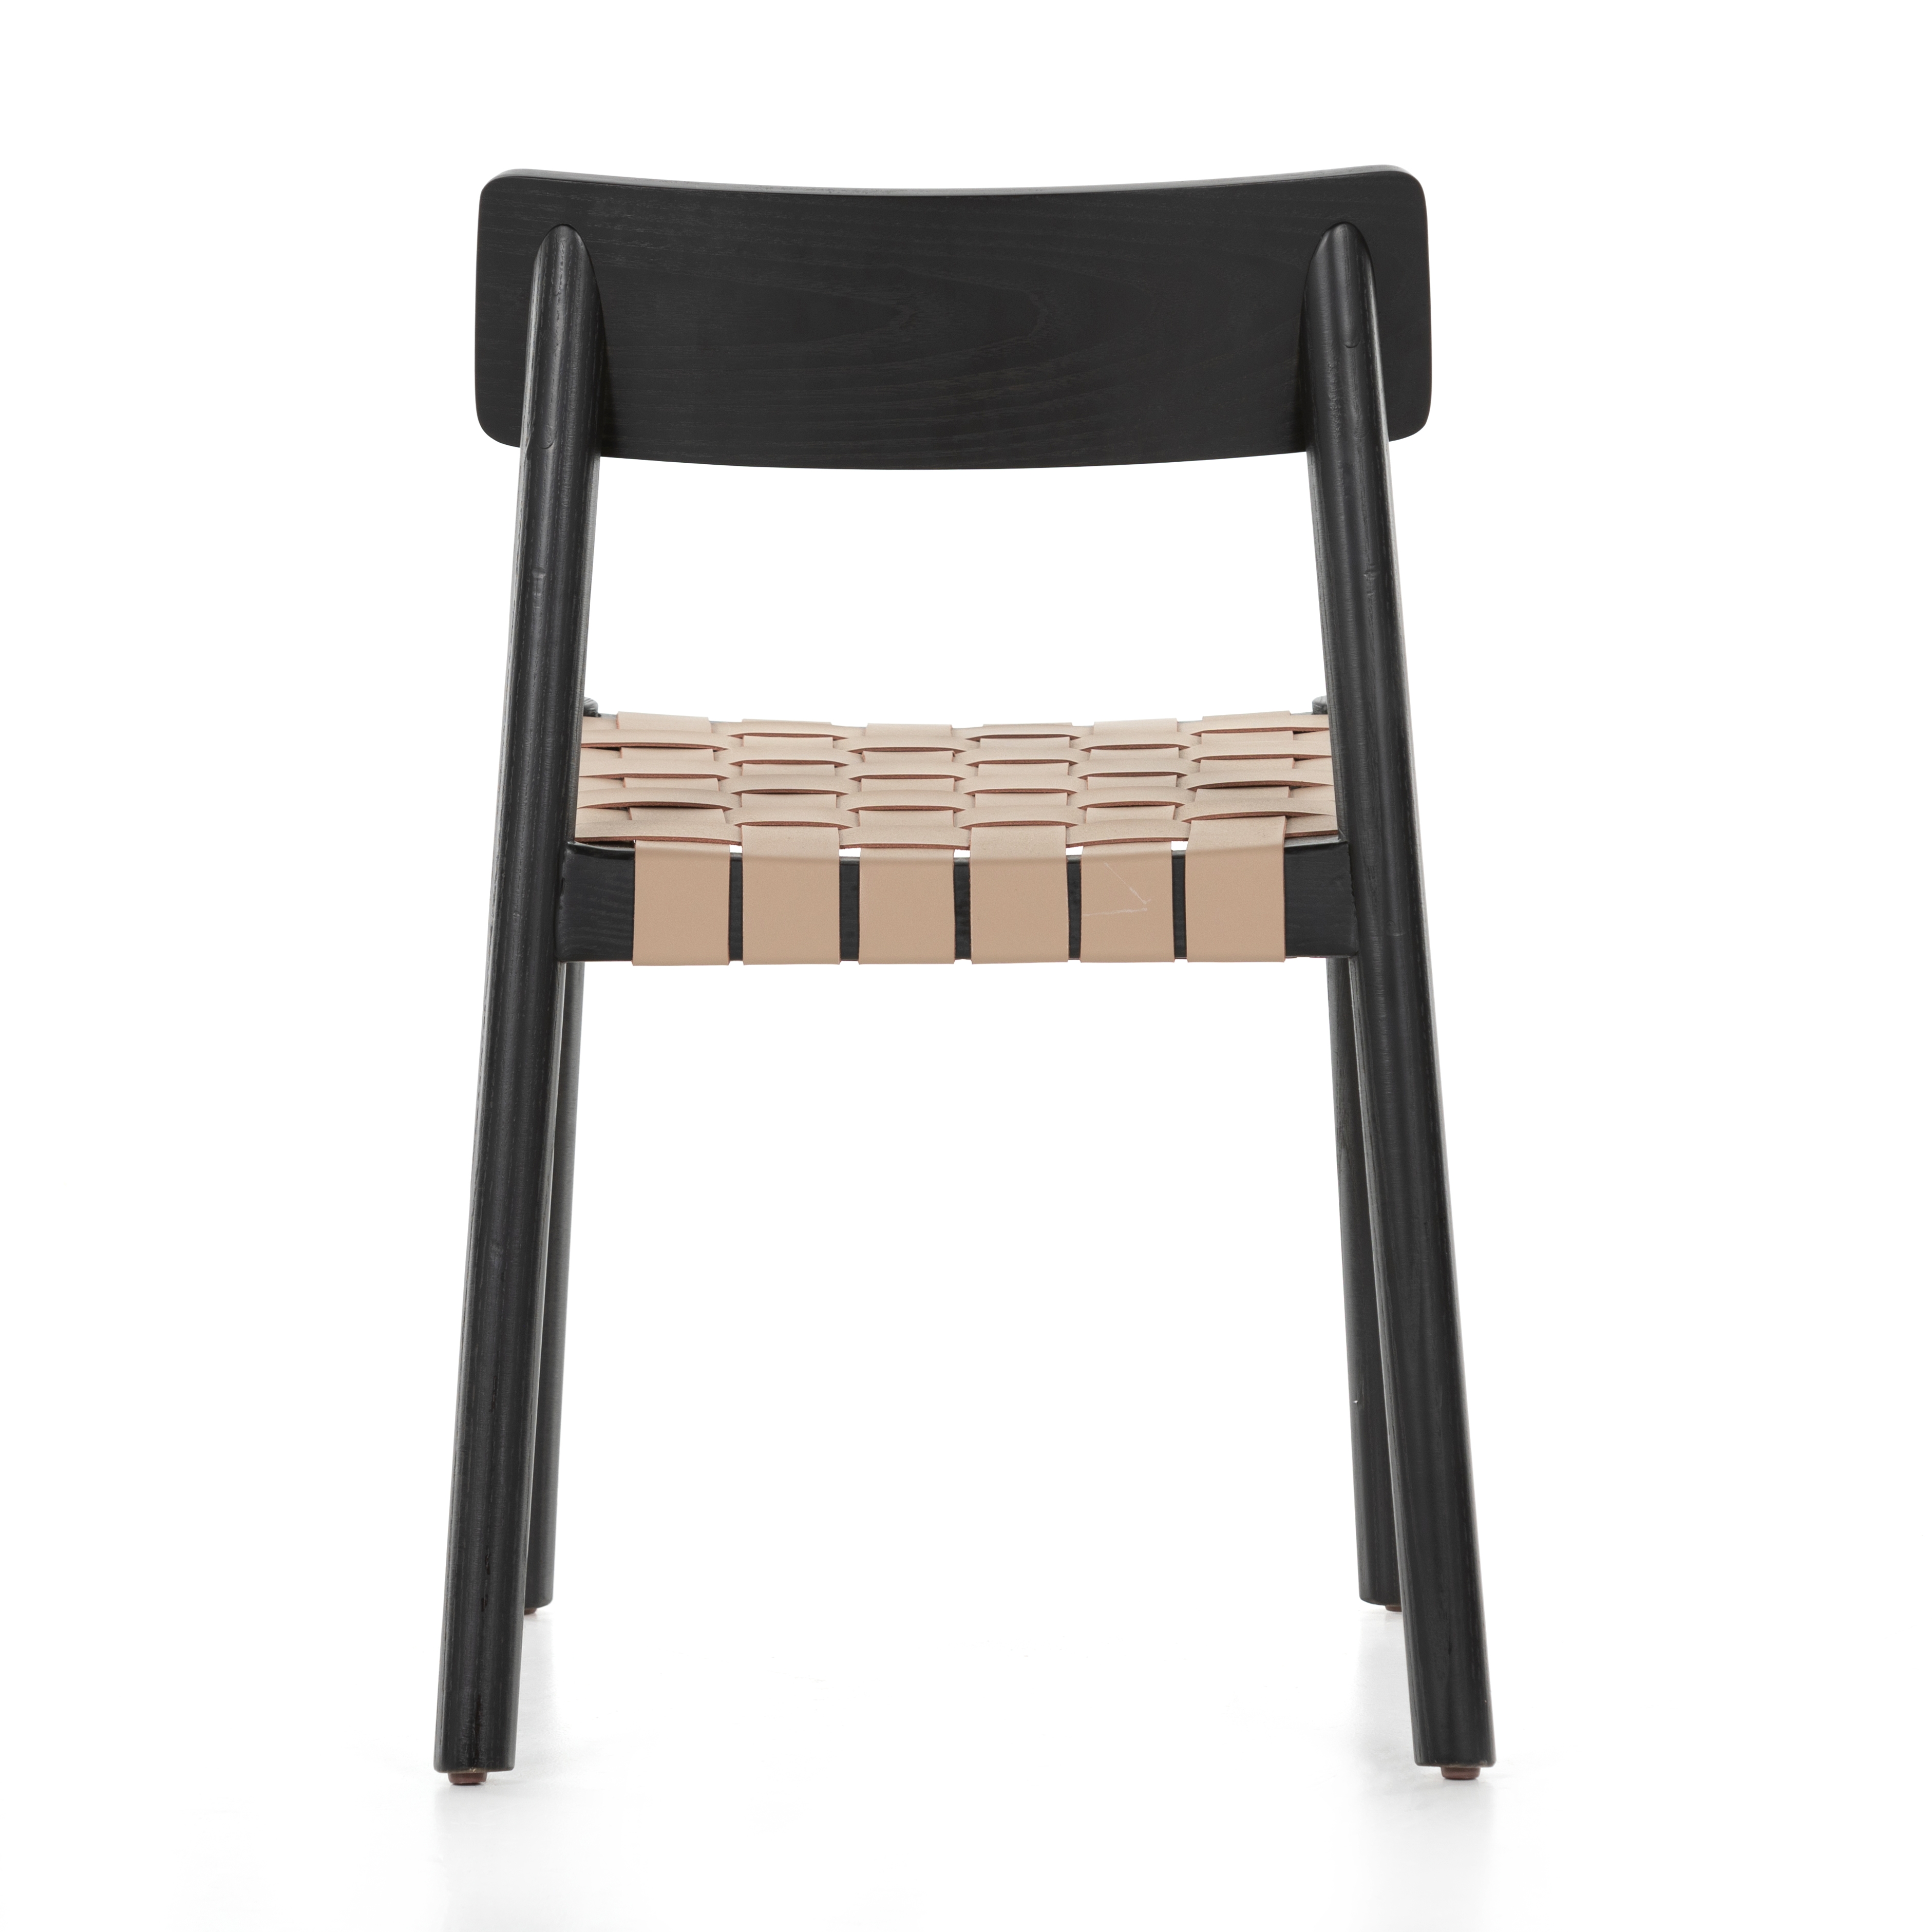 Heisler Dining Chair-Almond Le Blend - Image 5